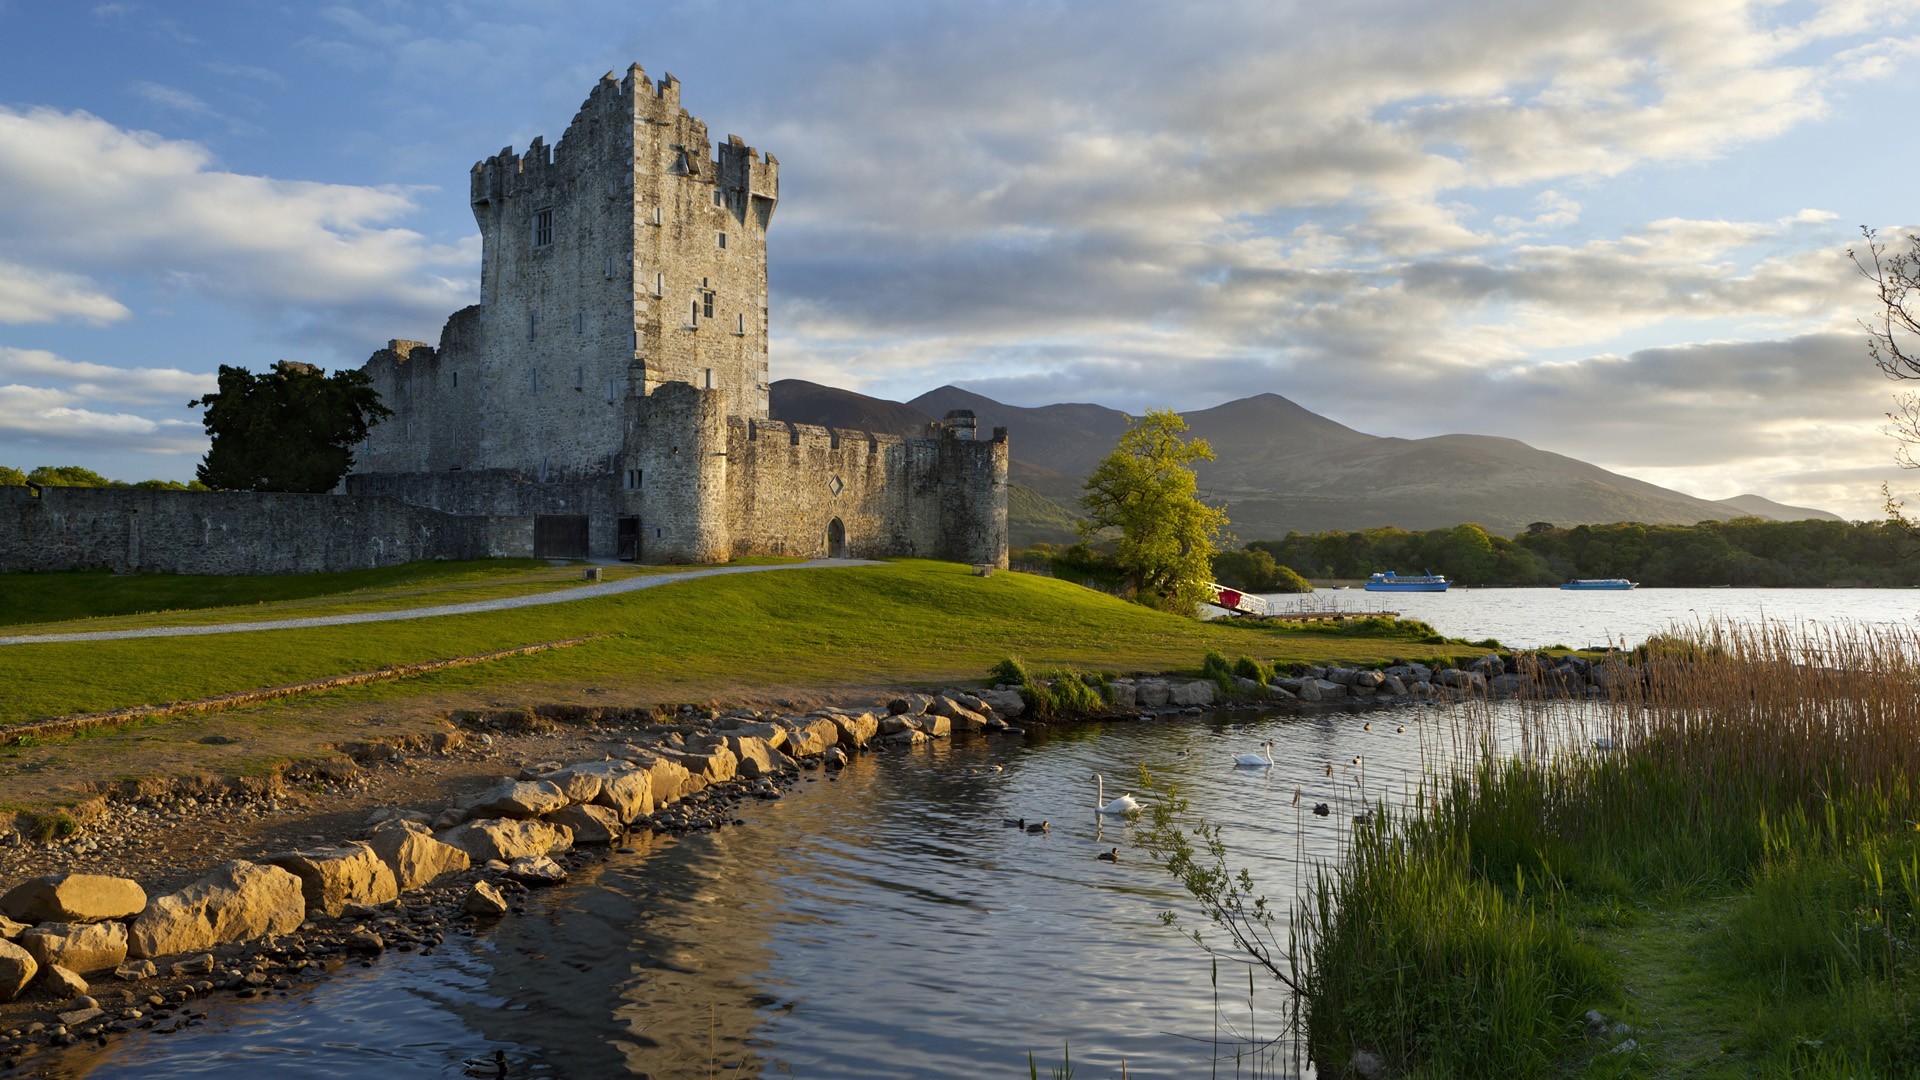 General 1920x1080 nature landscape architecture castle tower water clouds trees Ireland hills grass path stones river lake ship swans forest bricks wall